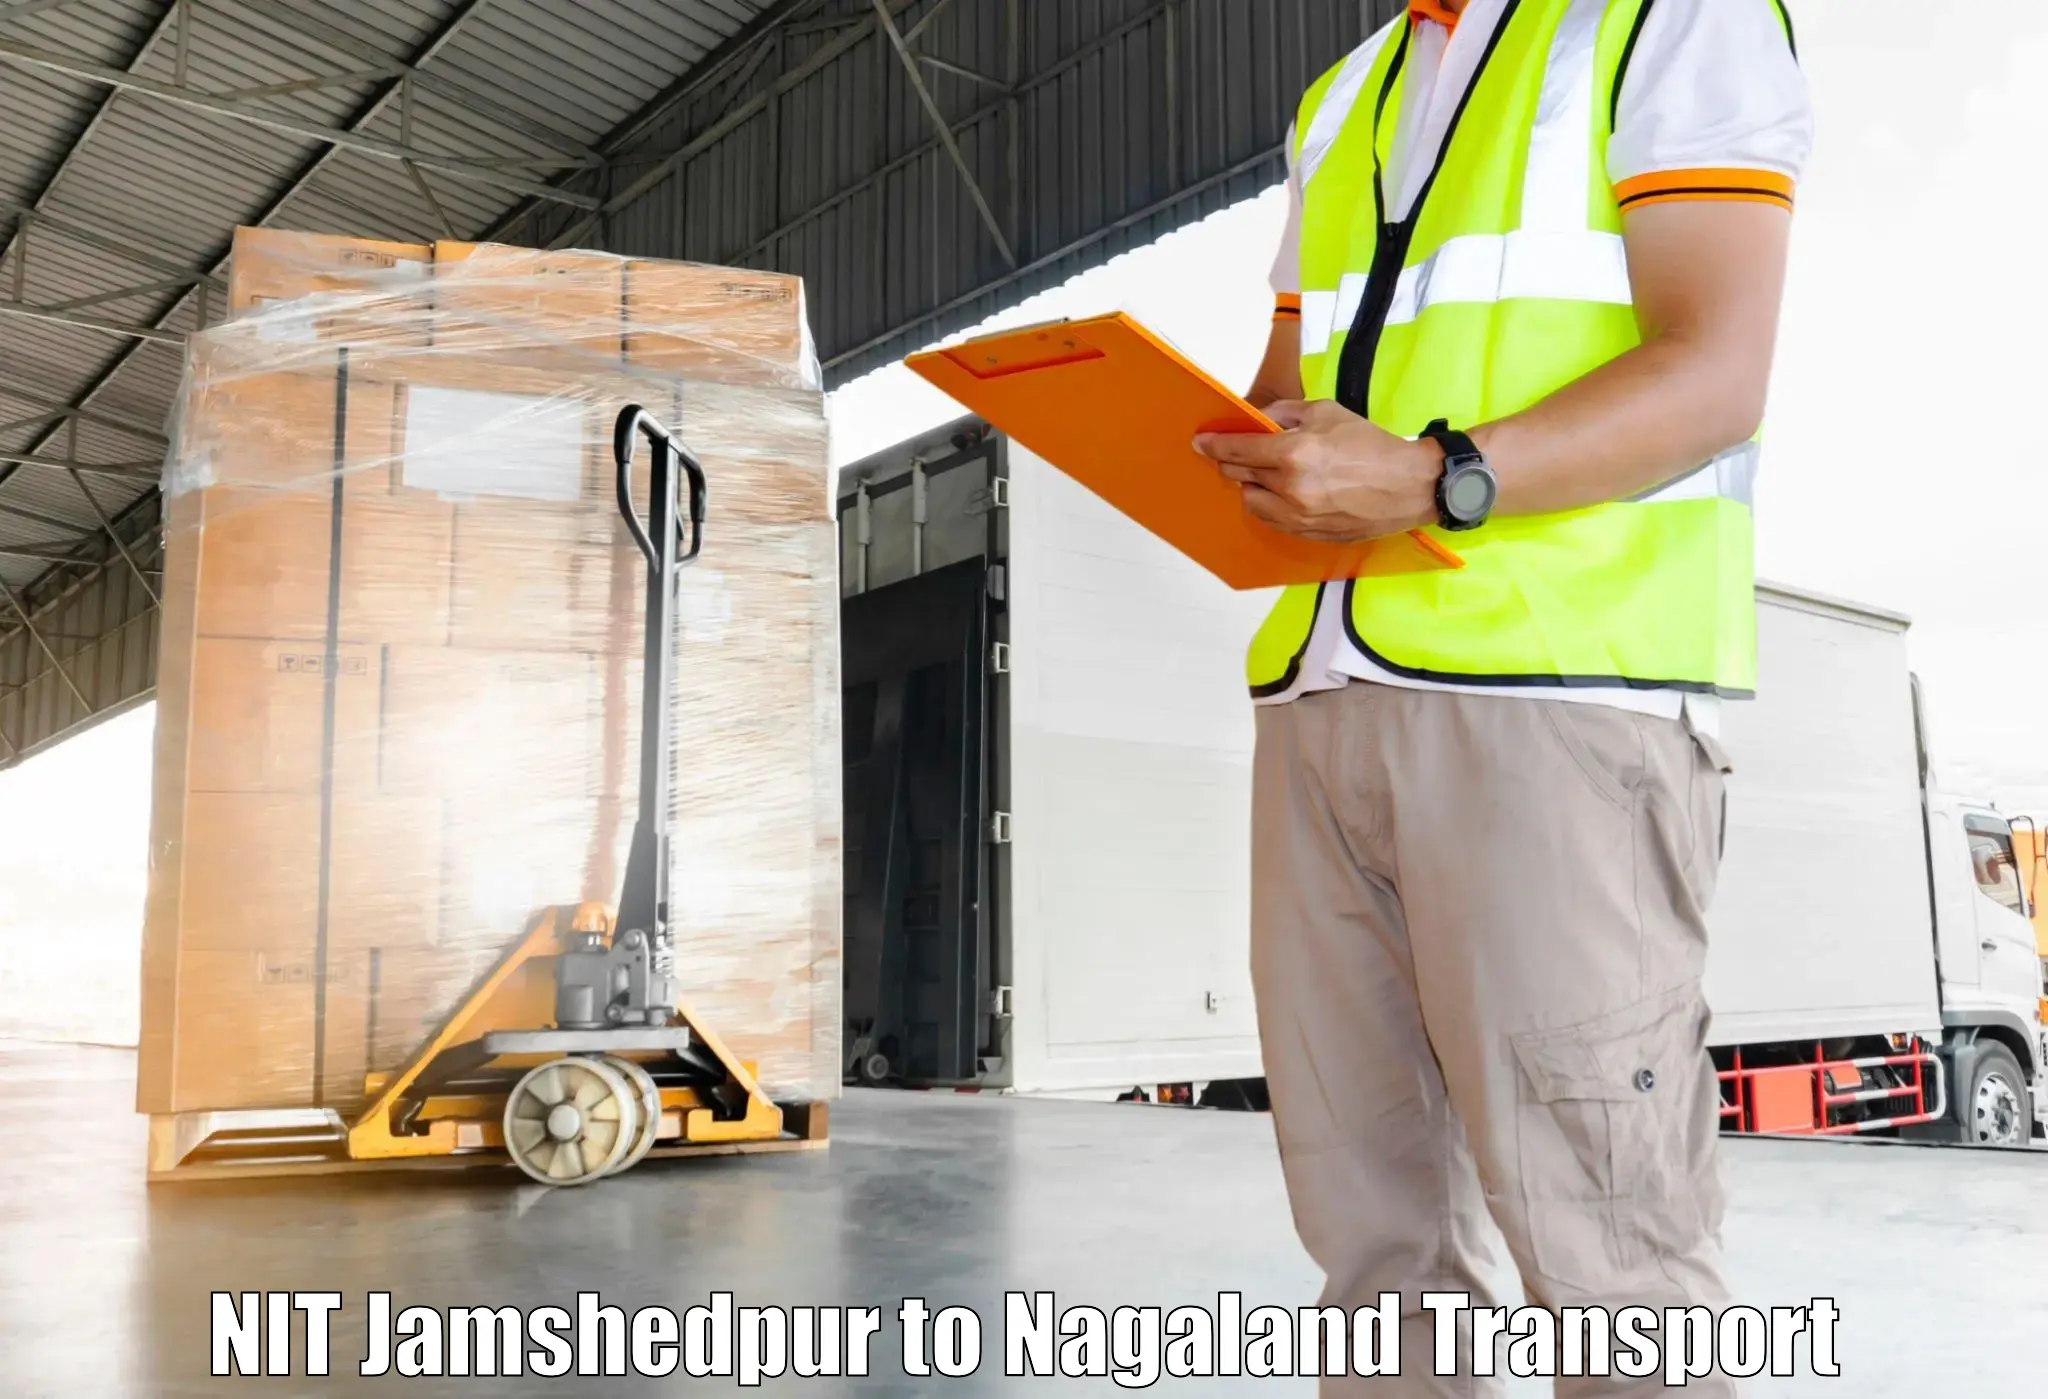 Container transportation services NIT Jamshedpur to Nagaland